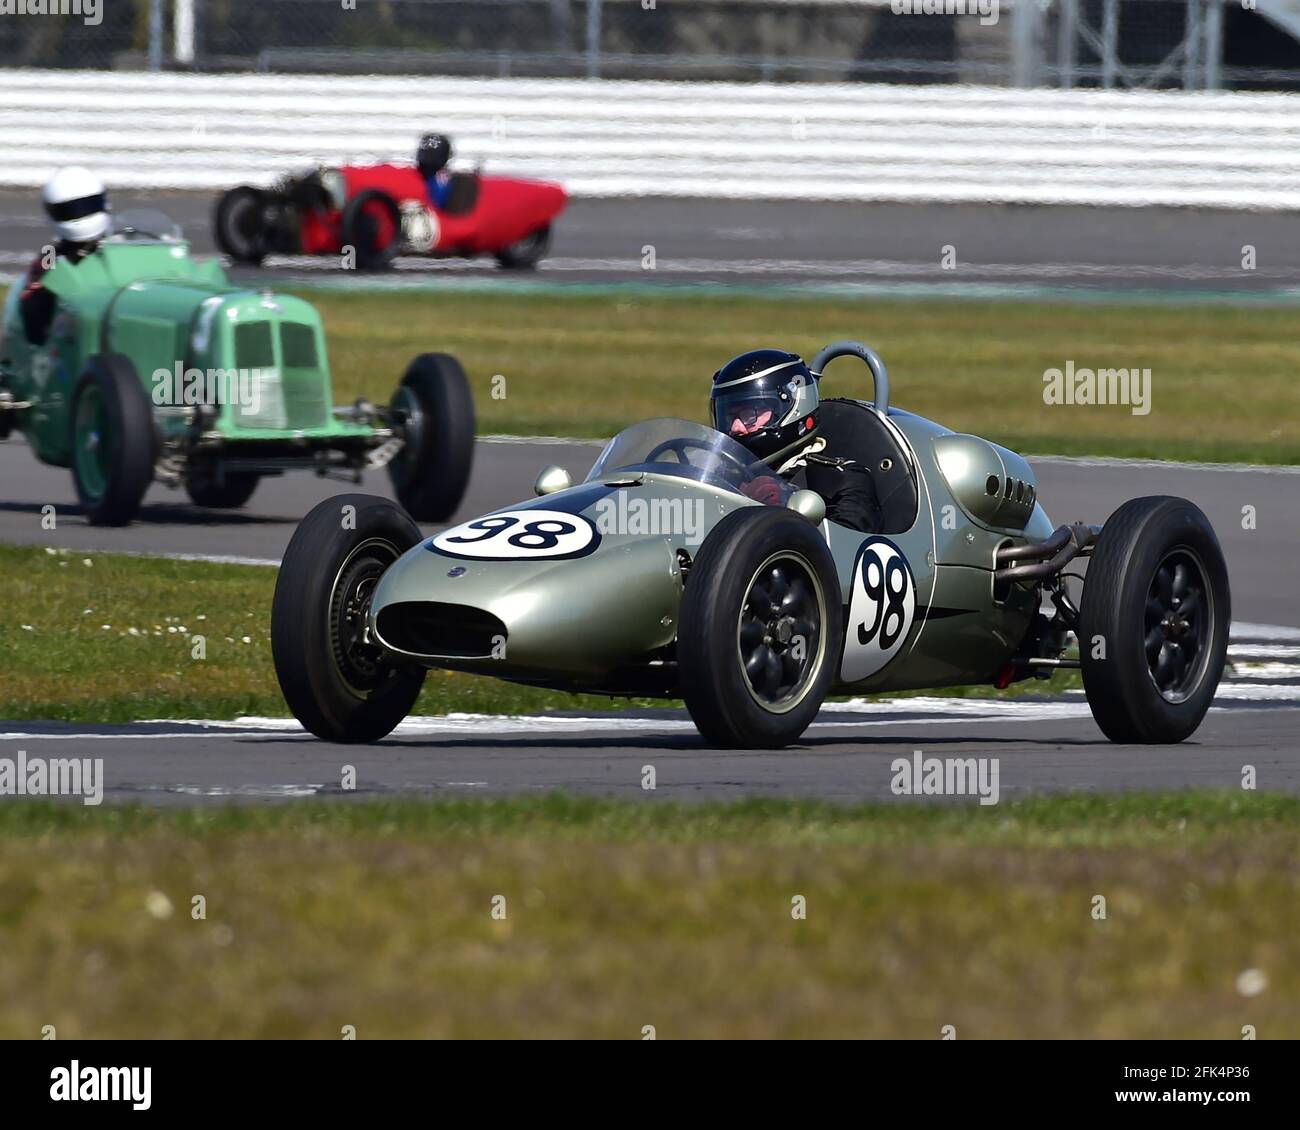 Duncan Ricketts, Cooper T41, Vintage, Pre-war und Pre-1961 Racing Cars GP Itala Trophy Race Meeting, Silverstone, Northamptonshire, England, 17. April Stockfoto